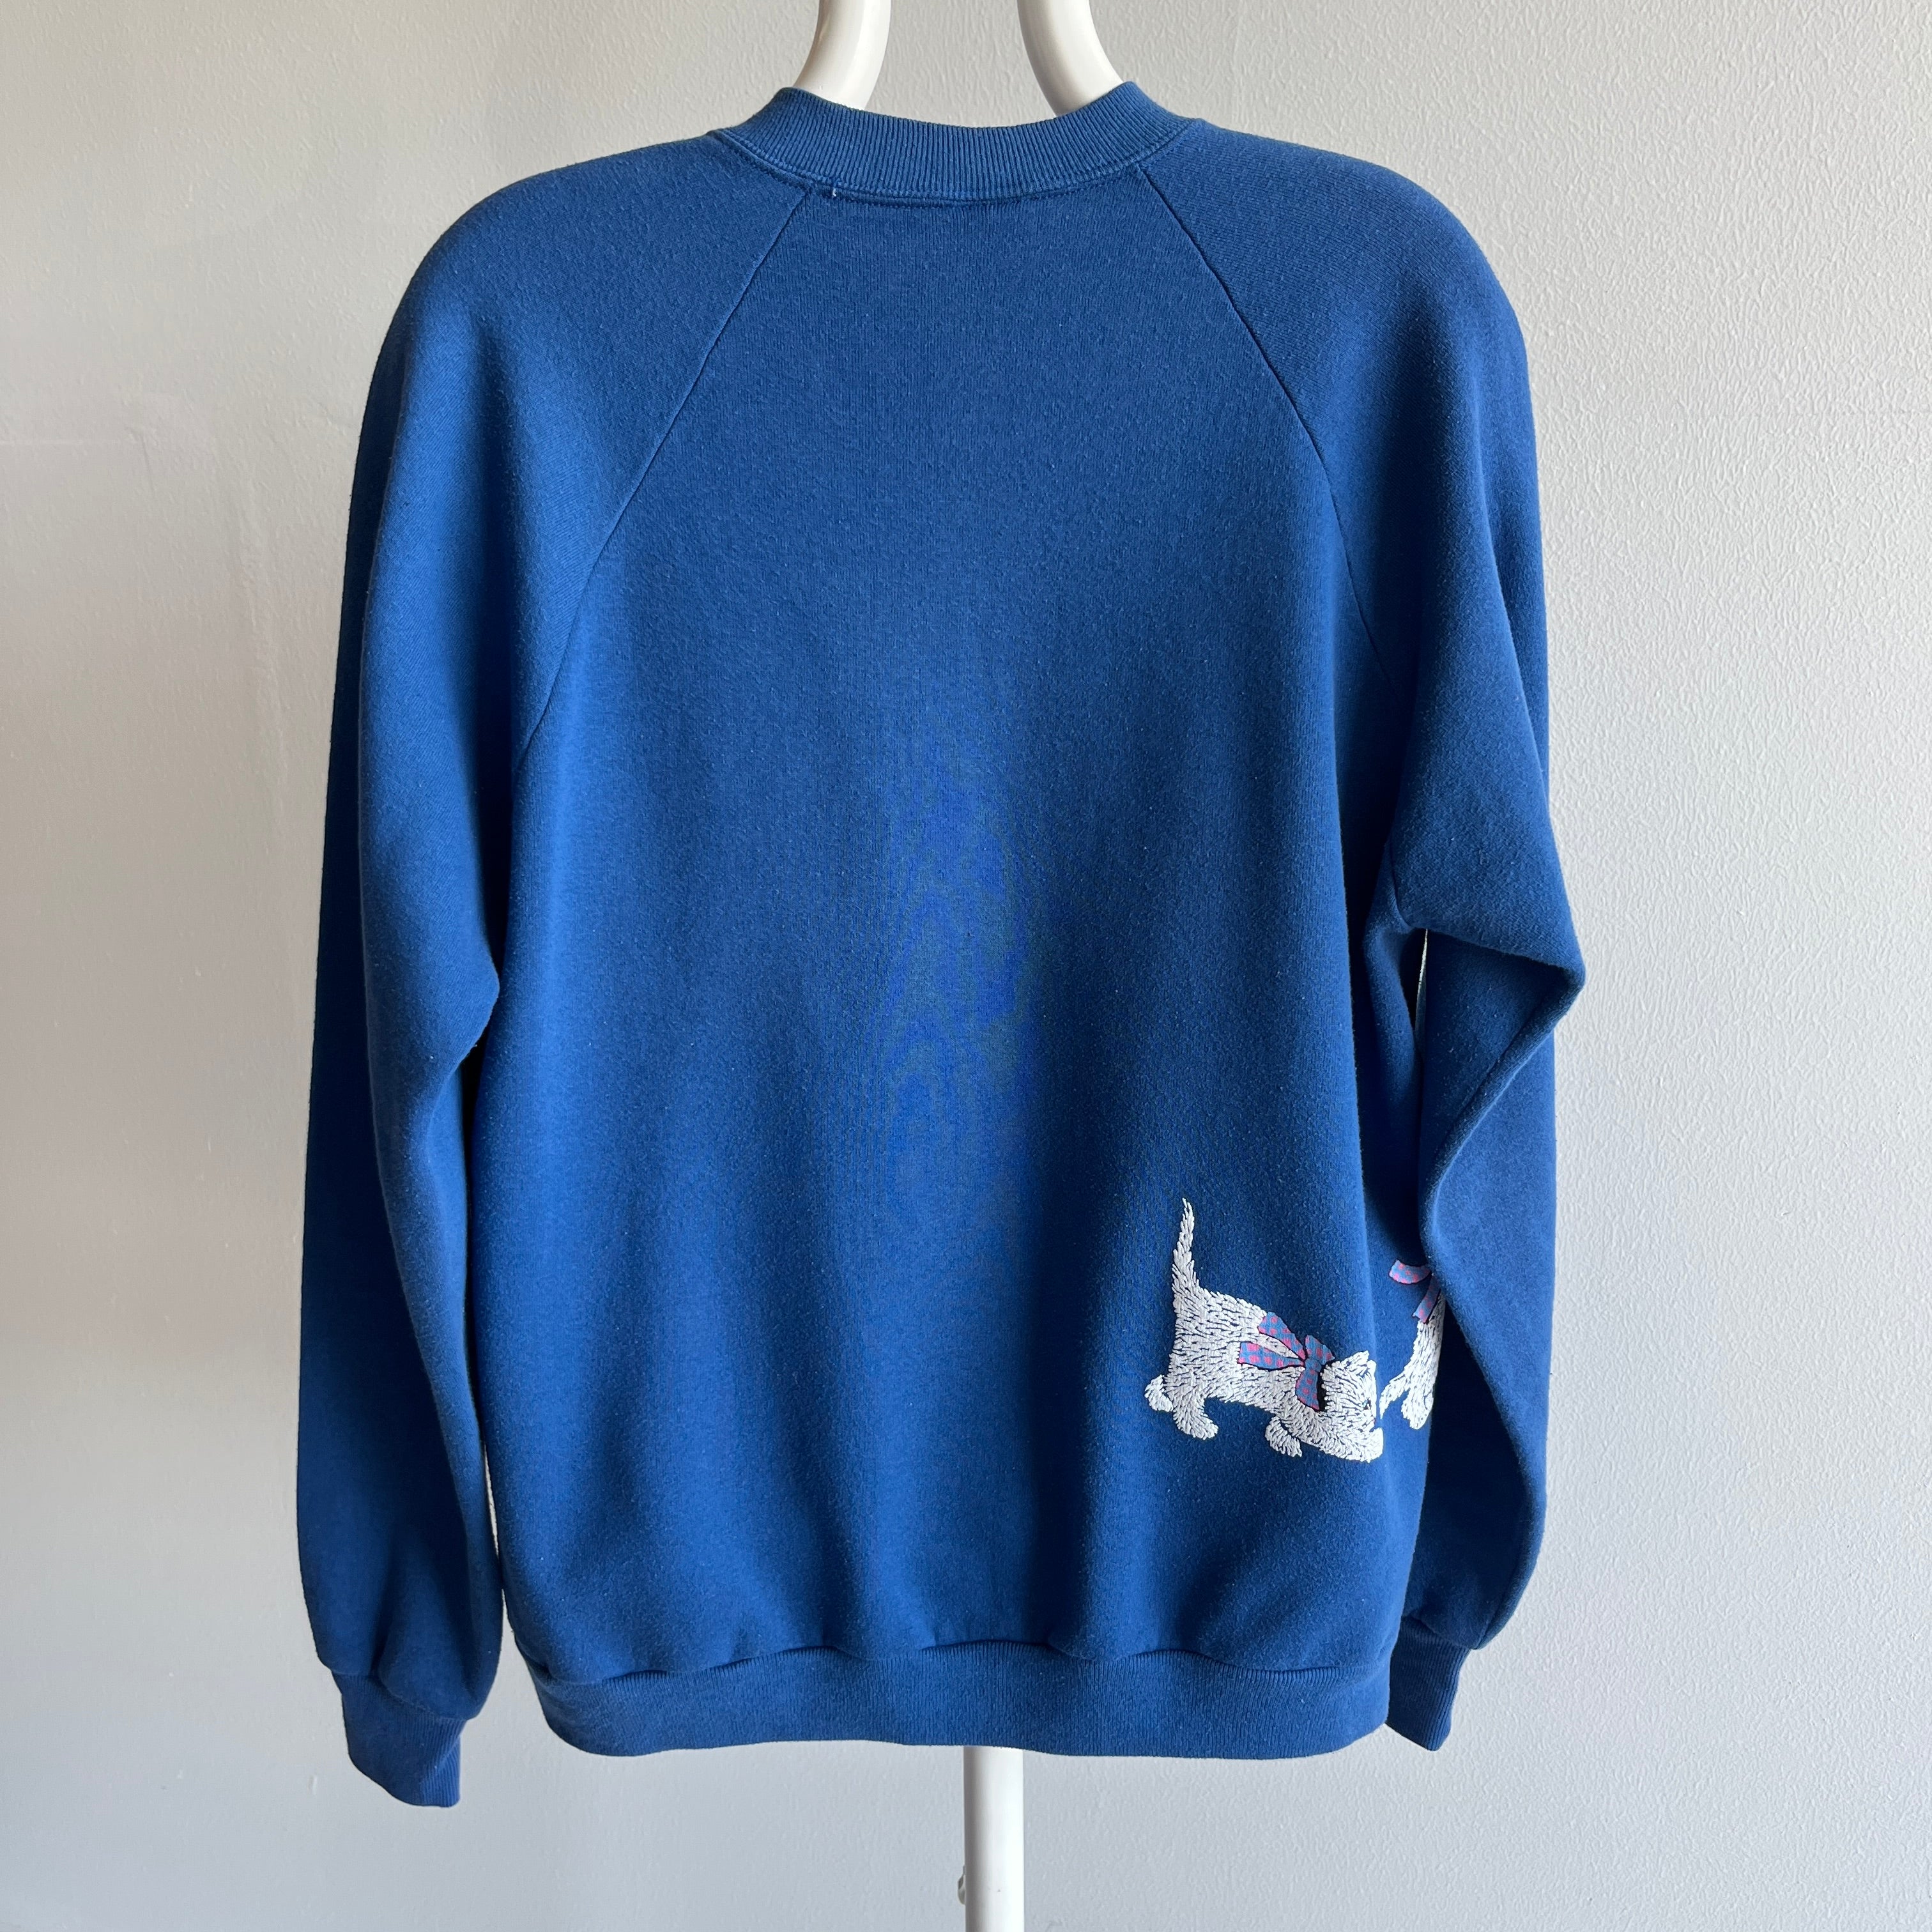 1980s Cats and Ribbons Wrap Around Sweatshirt - OMG